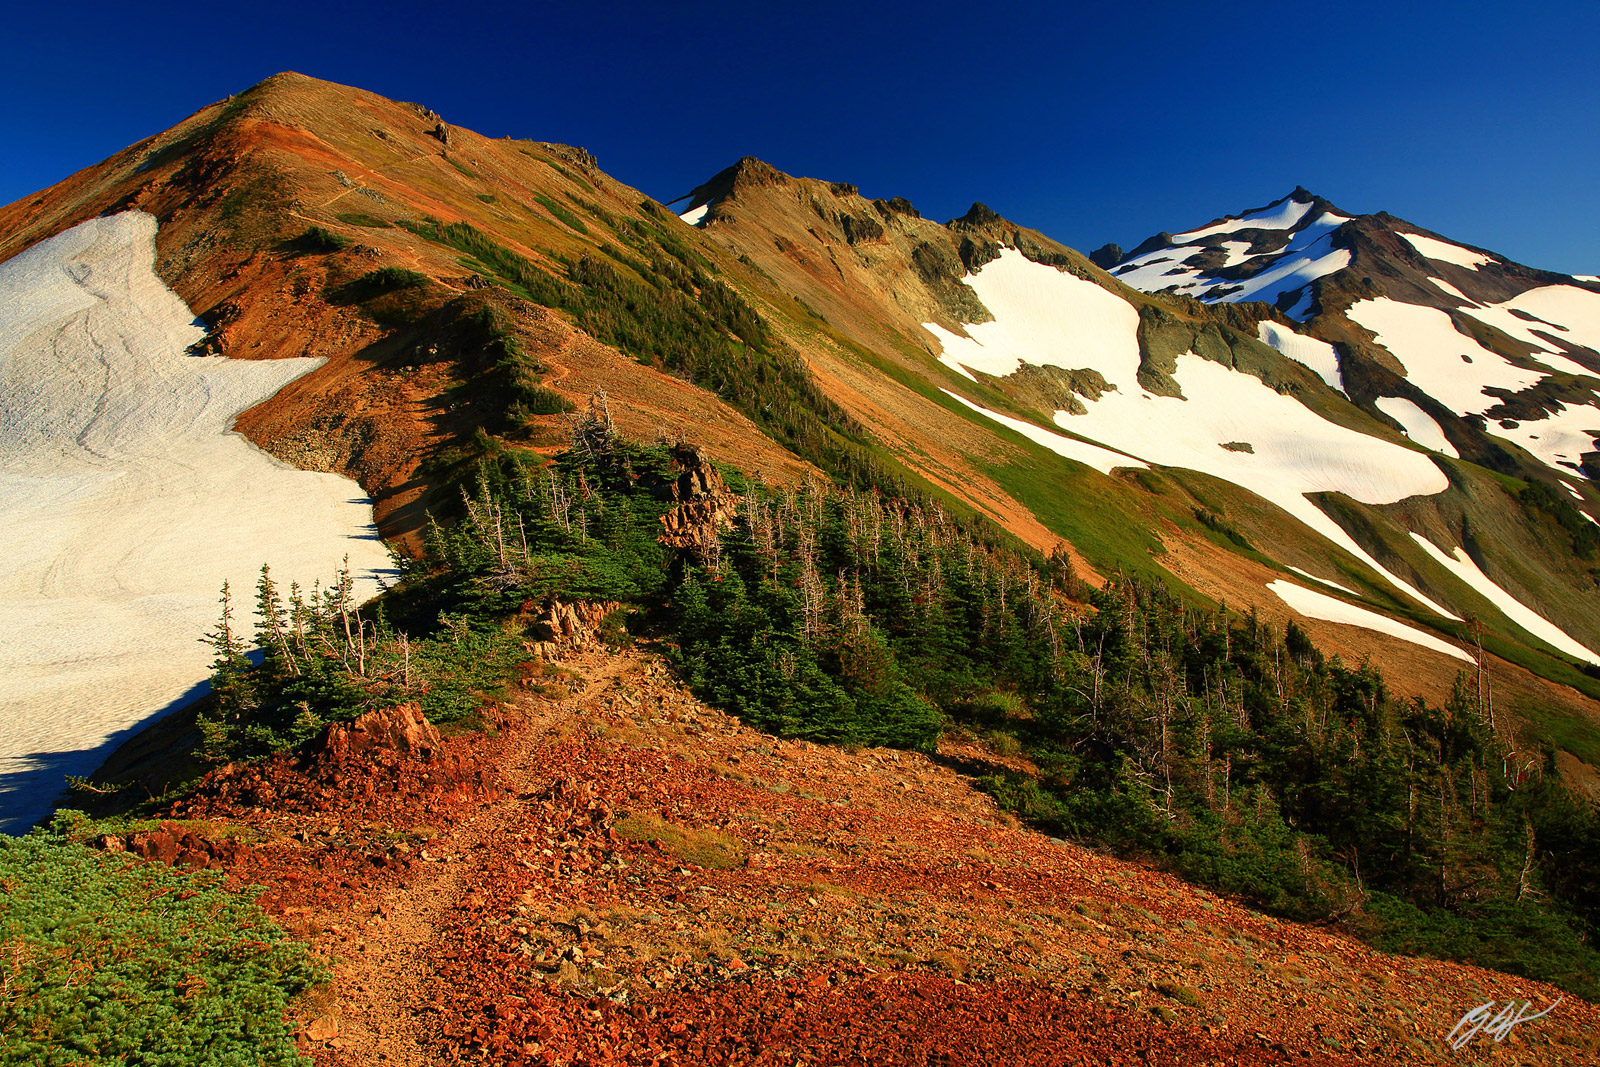 Old Snowy Mountain from the Pacific Crest Trail in the Goat Rocks Wilderness in Washington